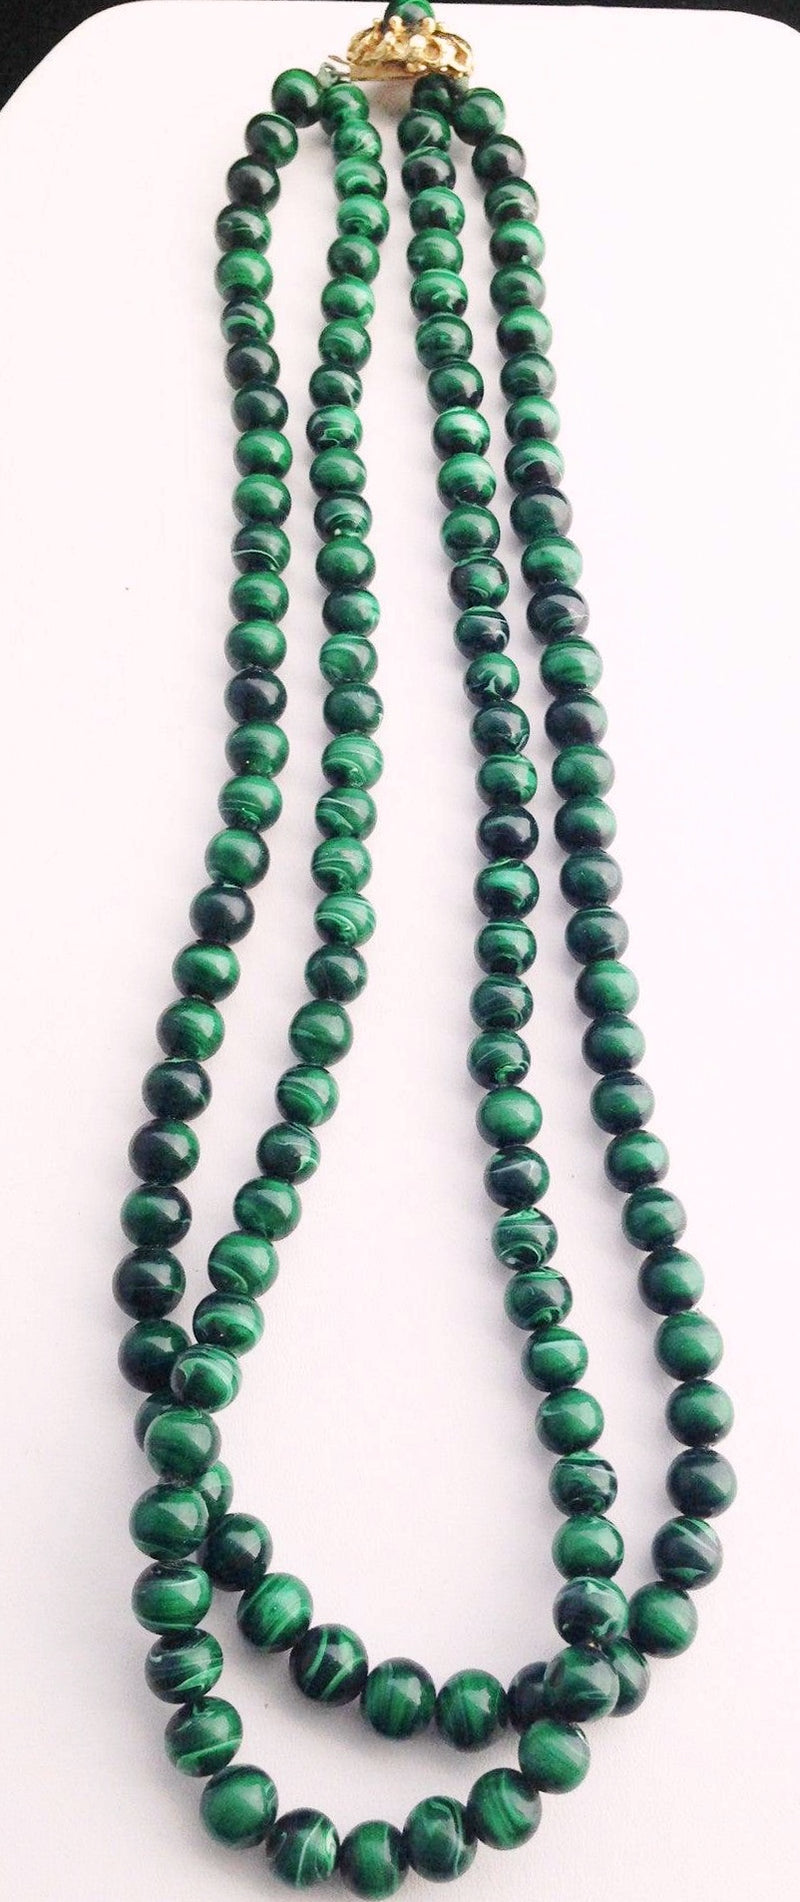 1950's Faux Malachite Bead Double Strand Necklace - 20" - Hers and His Treasures